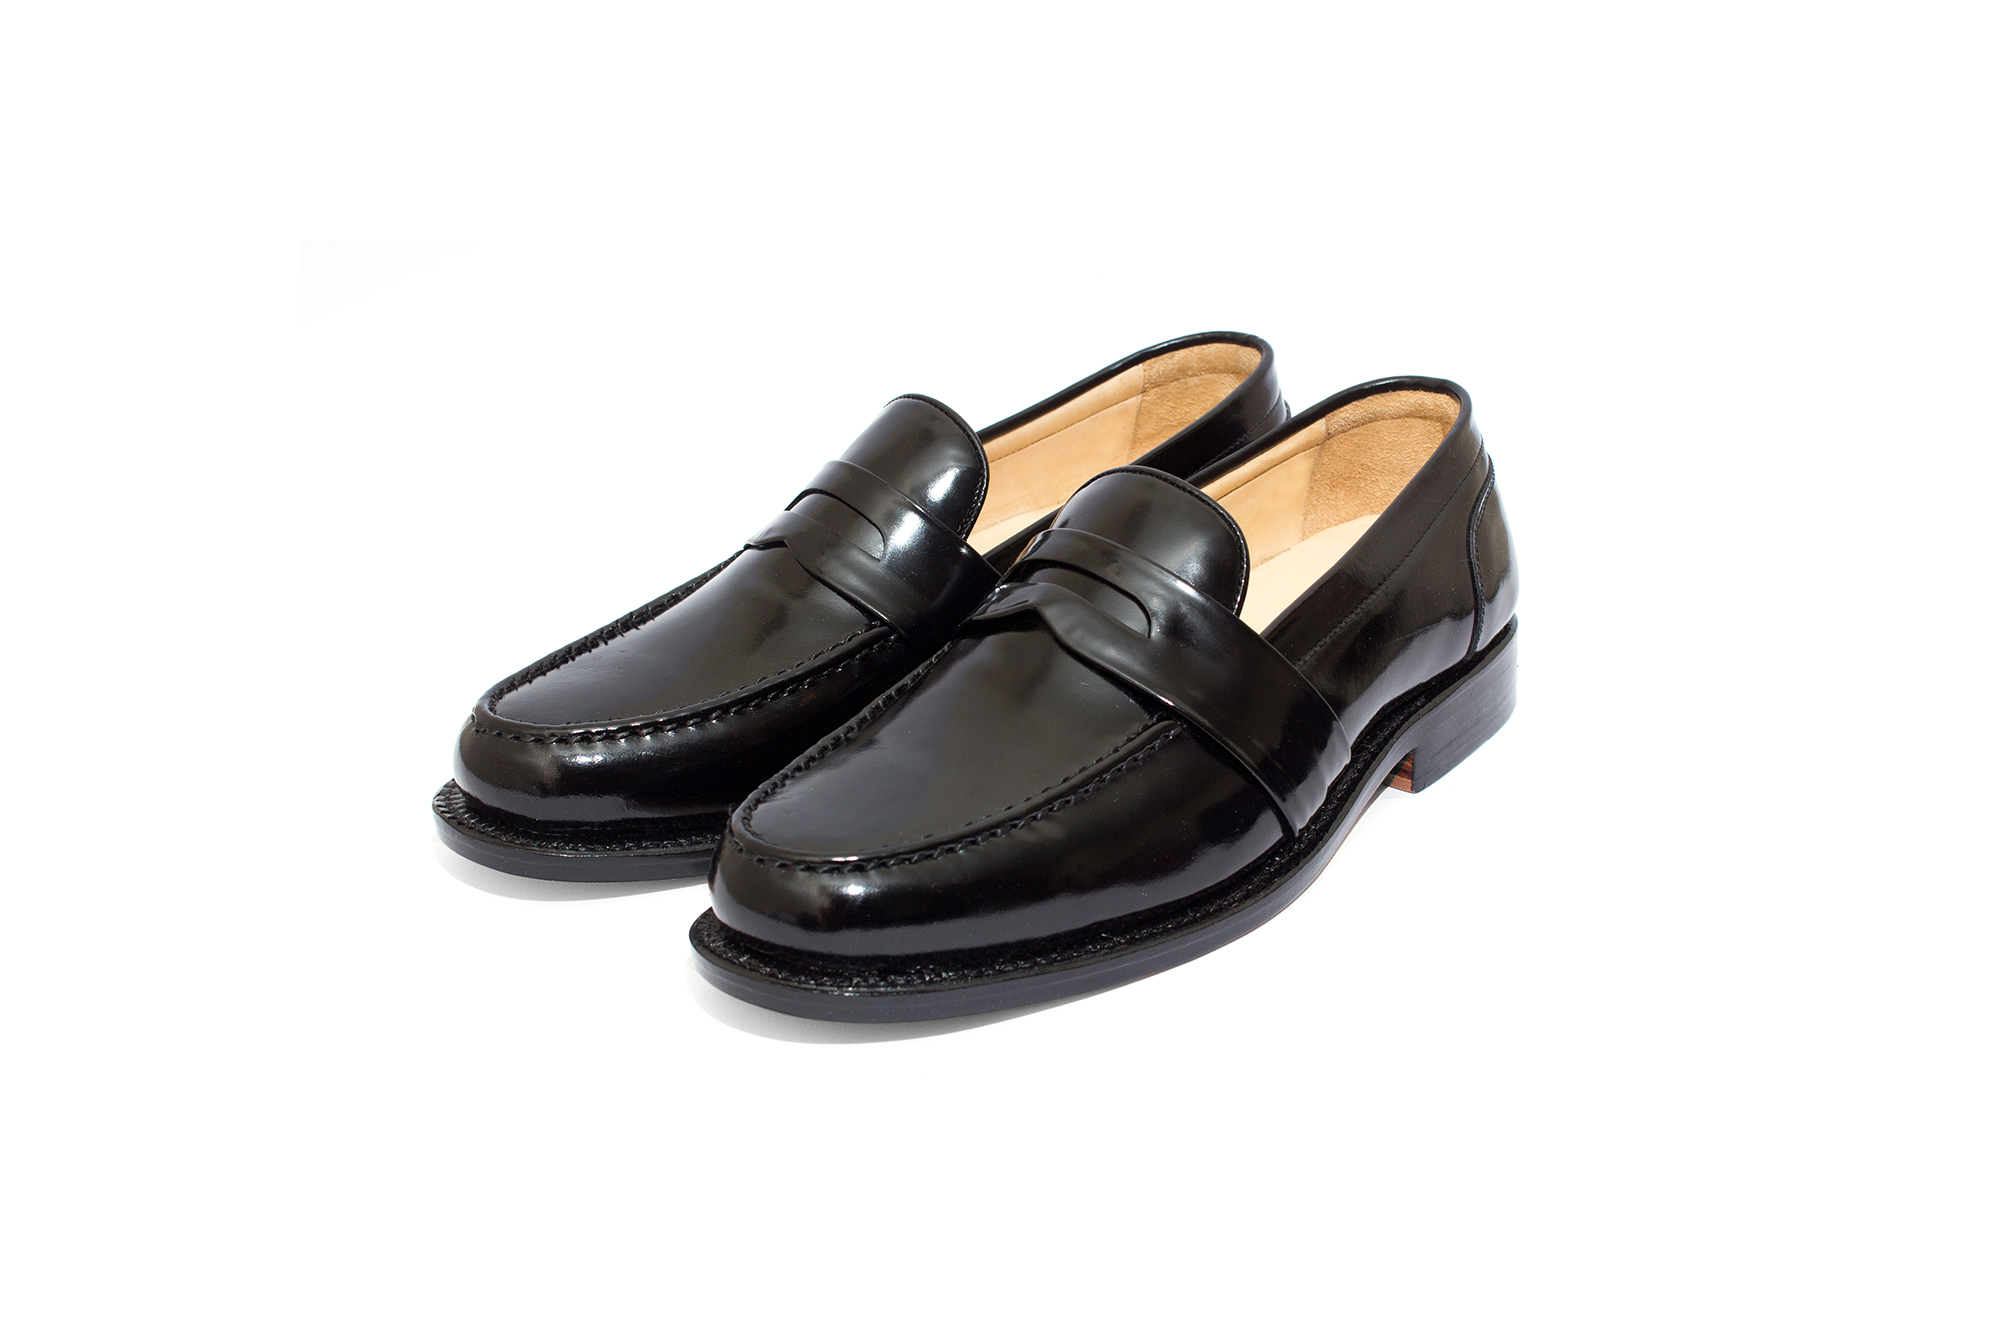 Penny Loafers | London Brown